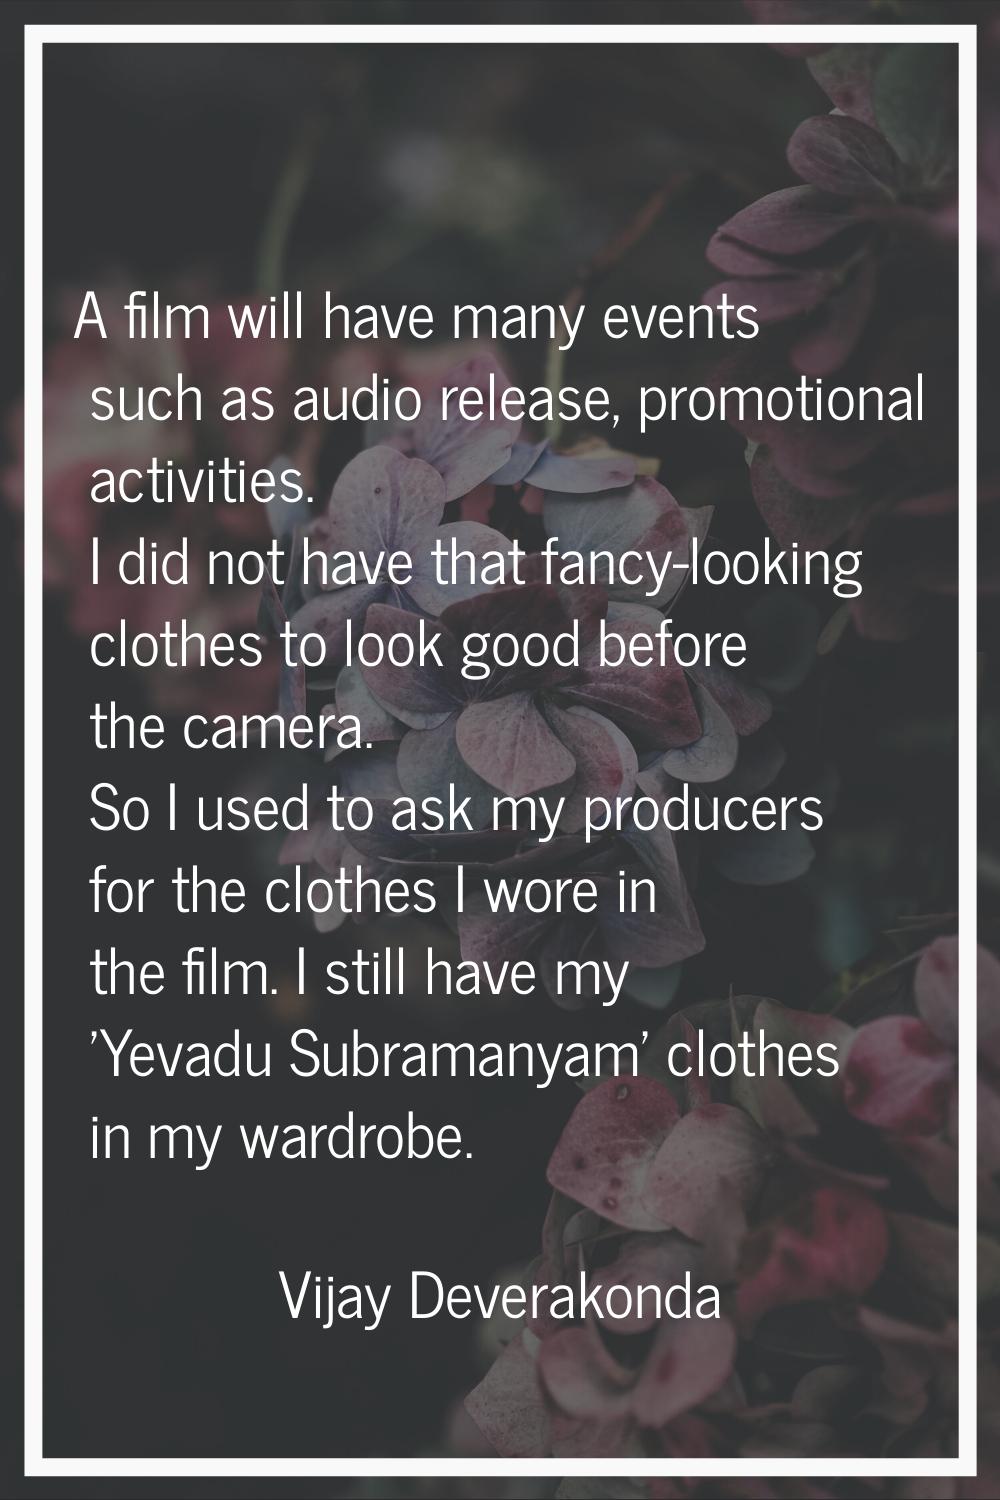 A film will have many events such as audio release, promotional activities. I did not have that fan